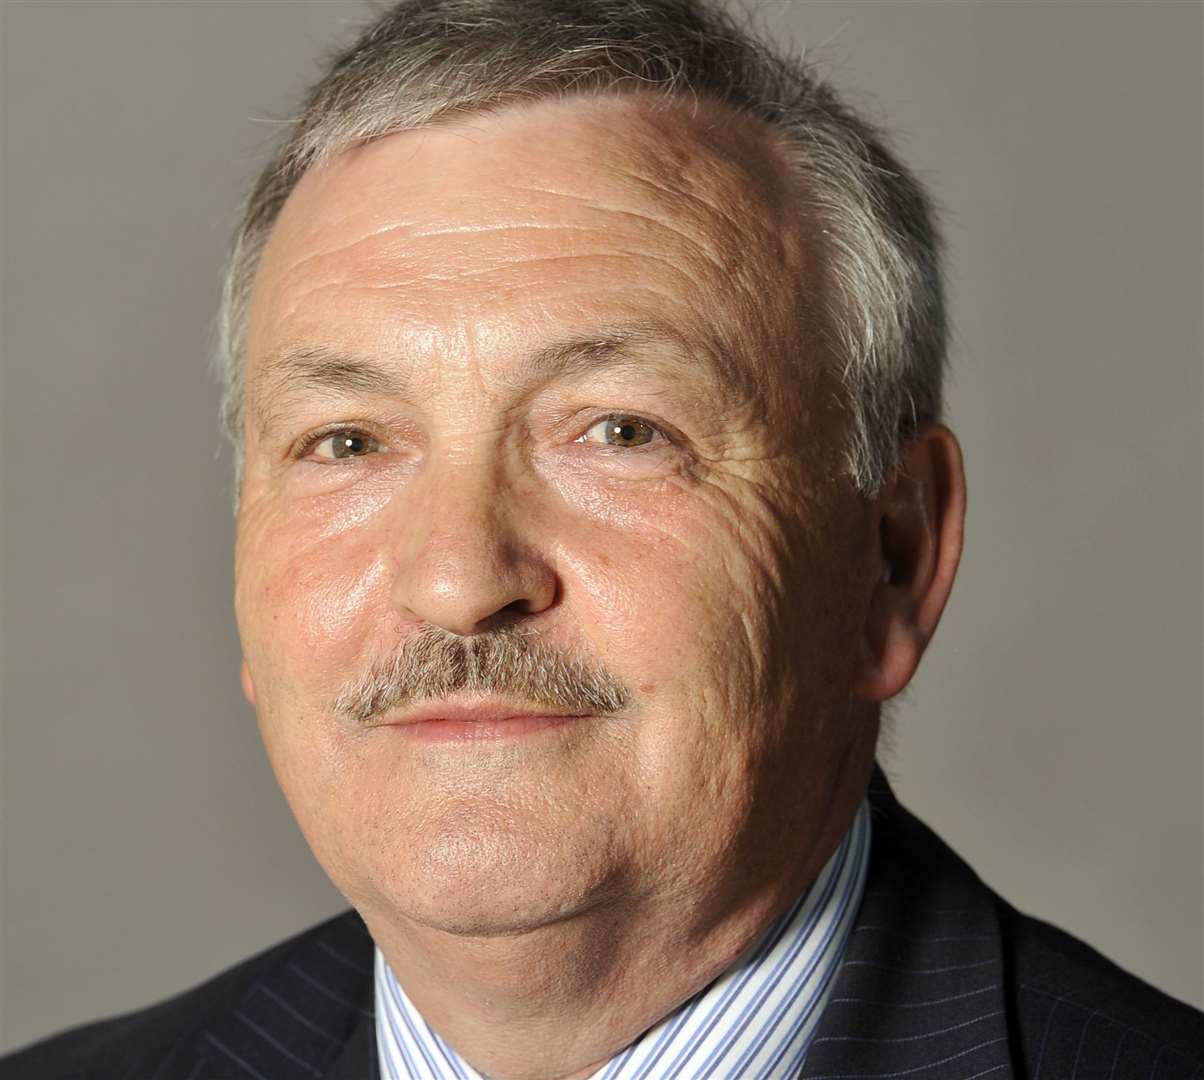 Medway Council leader Alan Jarrett says he is 'disappointed' with Cllr Sands comments